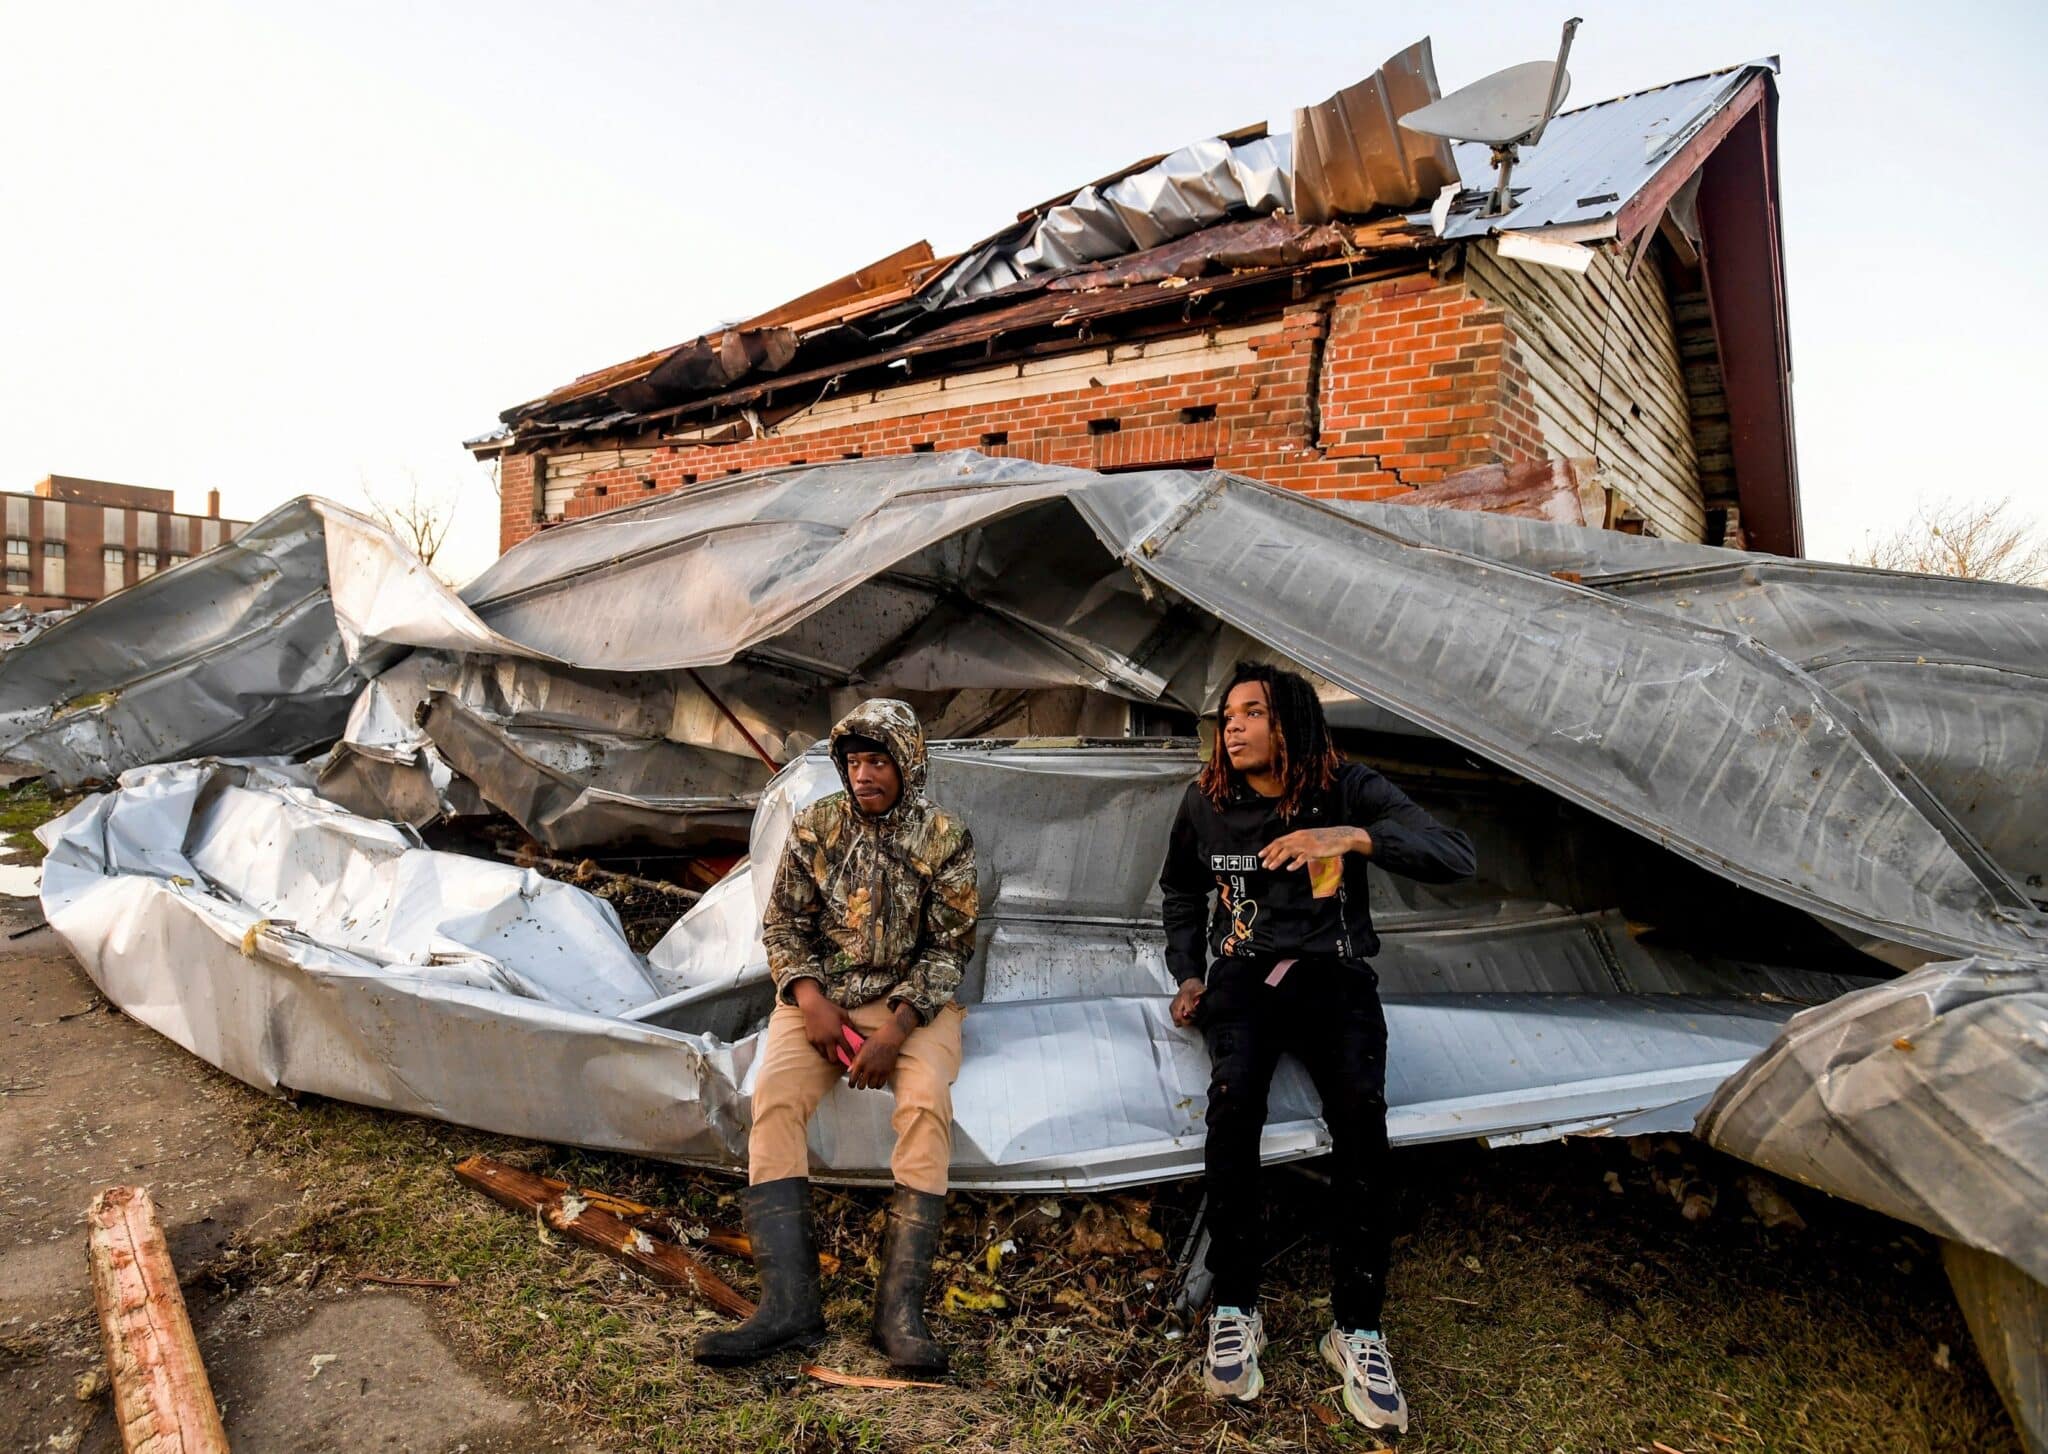 Cordel Tyus and Devo McGraw sit on roofing from an industrial building in front of their home in Selma, Ala., Jan.12, 2023, after a tornado ripped through the area the previous day. A giant, swirling storm system billowing across the South Jan. 11, killed at least six people in central Alabama, the Associated Press reported. (OSV News photo/Mickey Welsh, USA Today Network via visa Reuters)